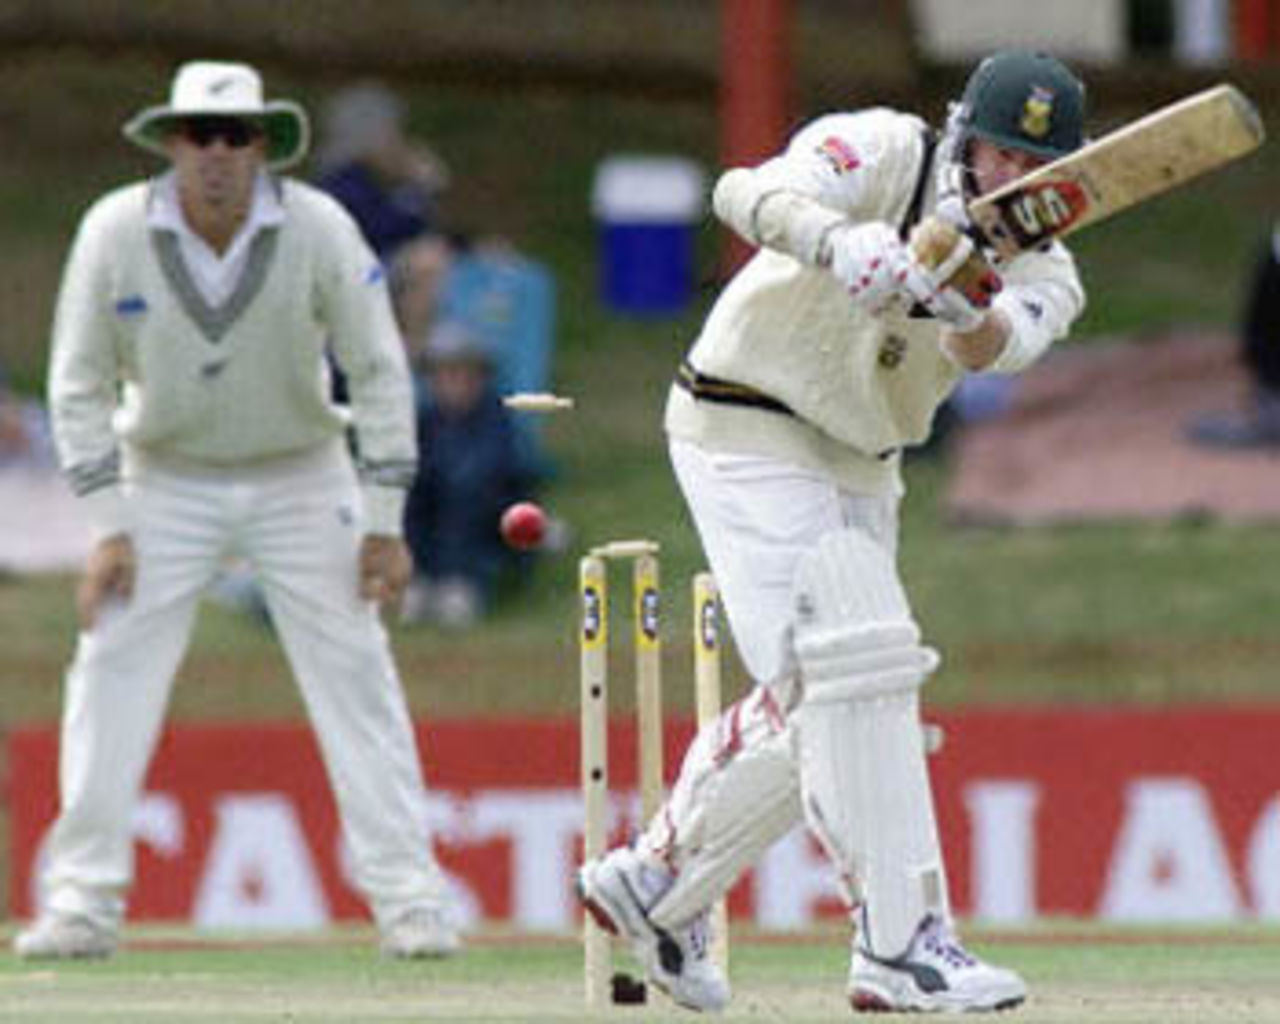 Klusener bowled neck and crop by O'Connor, New Zealand in South Africa, 2000/01, 1st Test, South Africa v New Zealand, Goodyear Park, Bloemfontein, 17-21 November 2000 (Day 2).